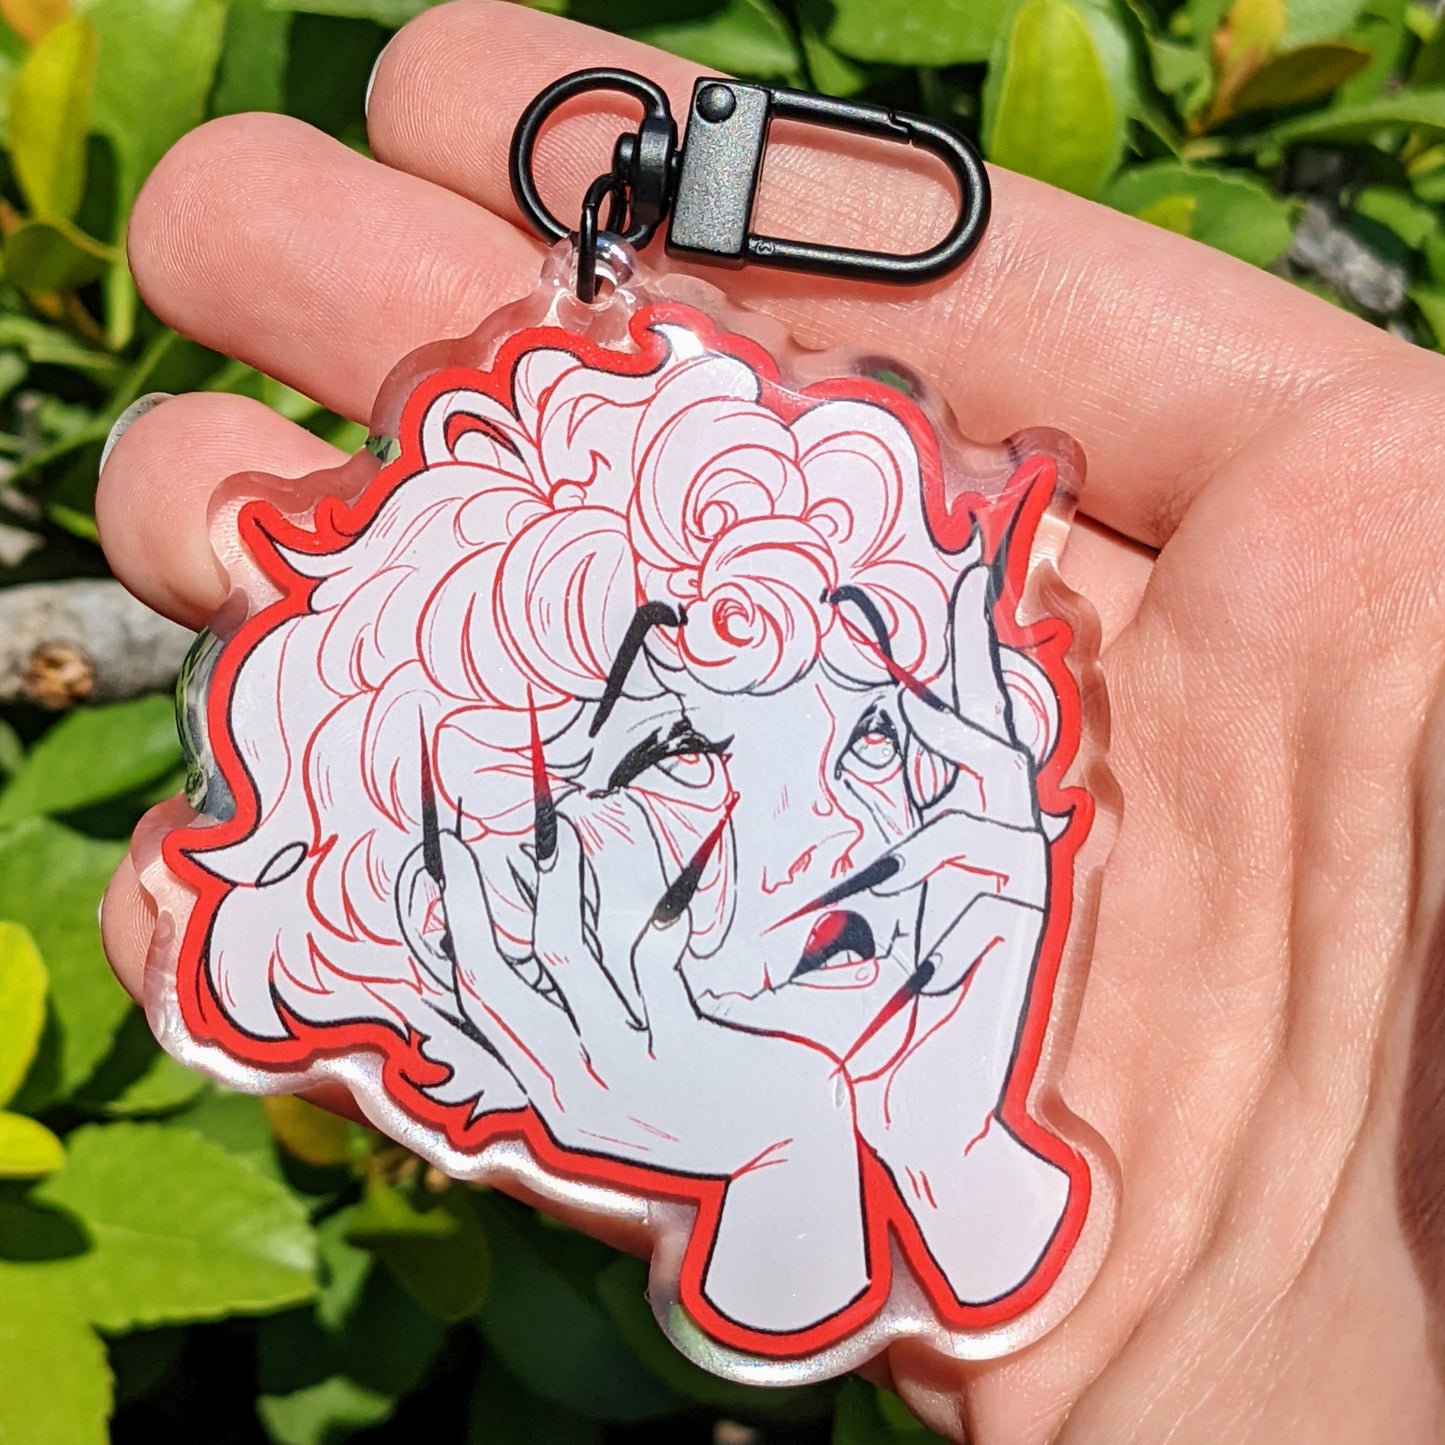 Droopy Eyes Keychain